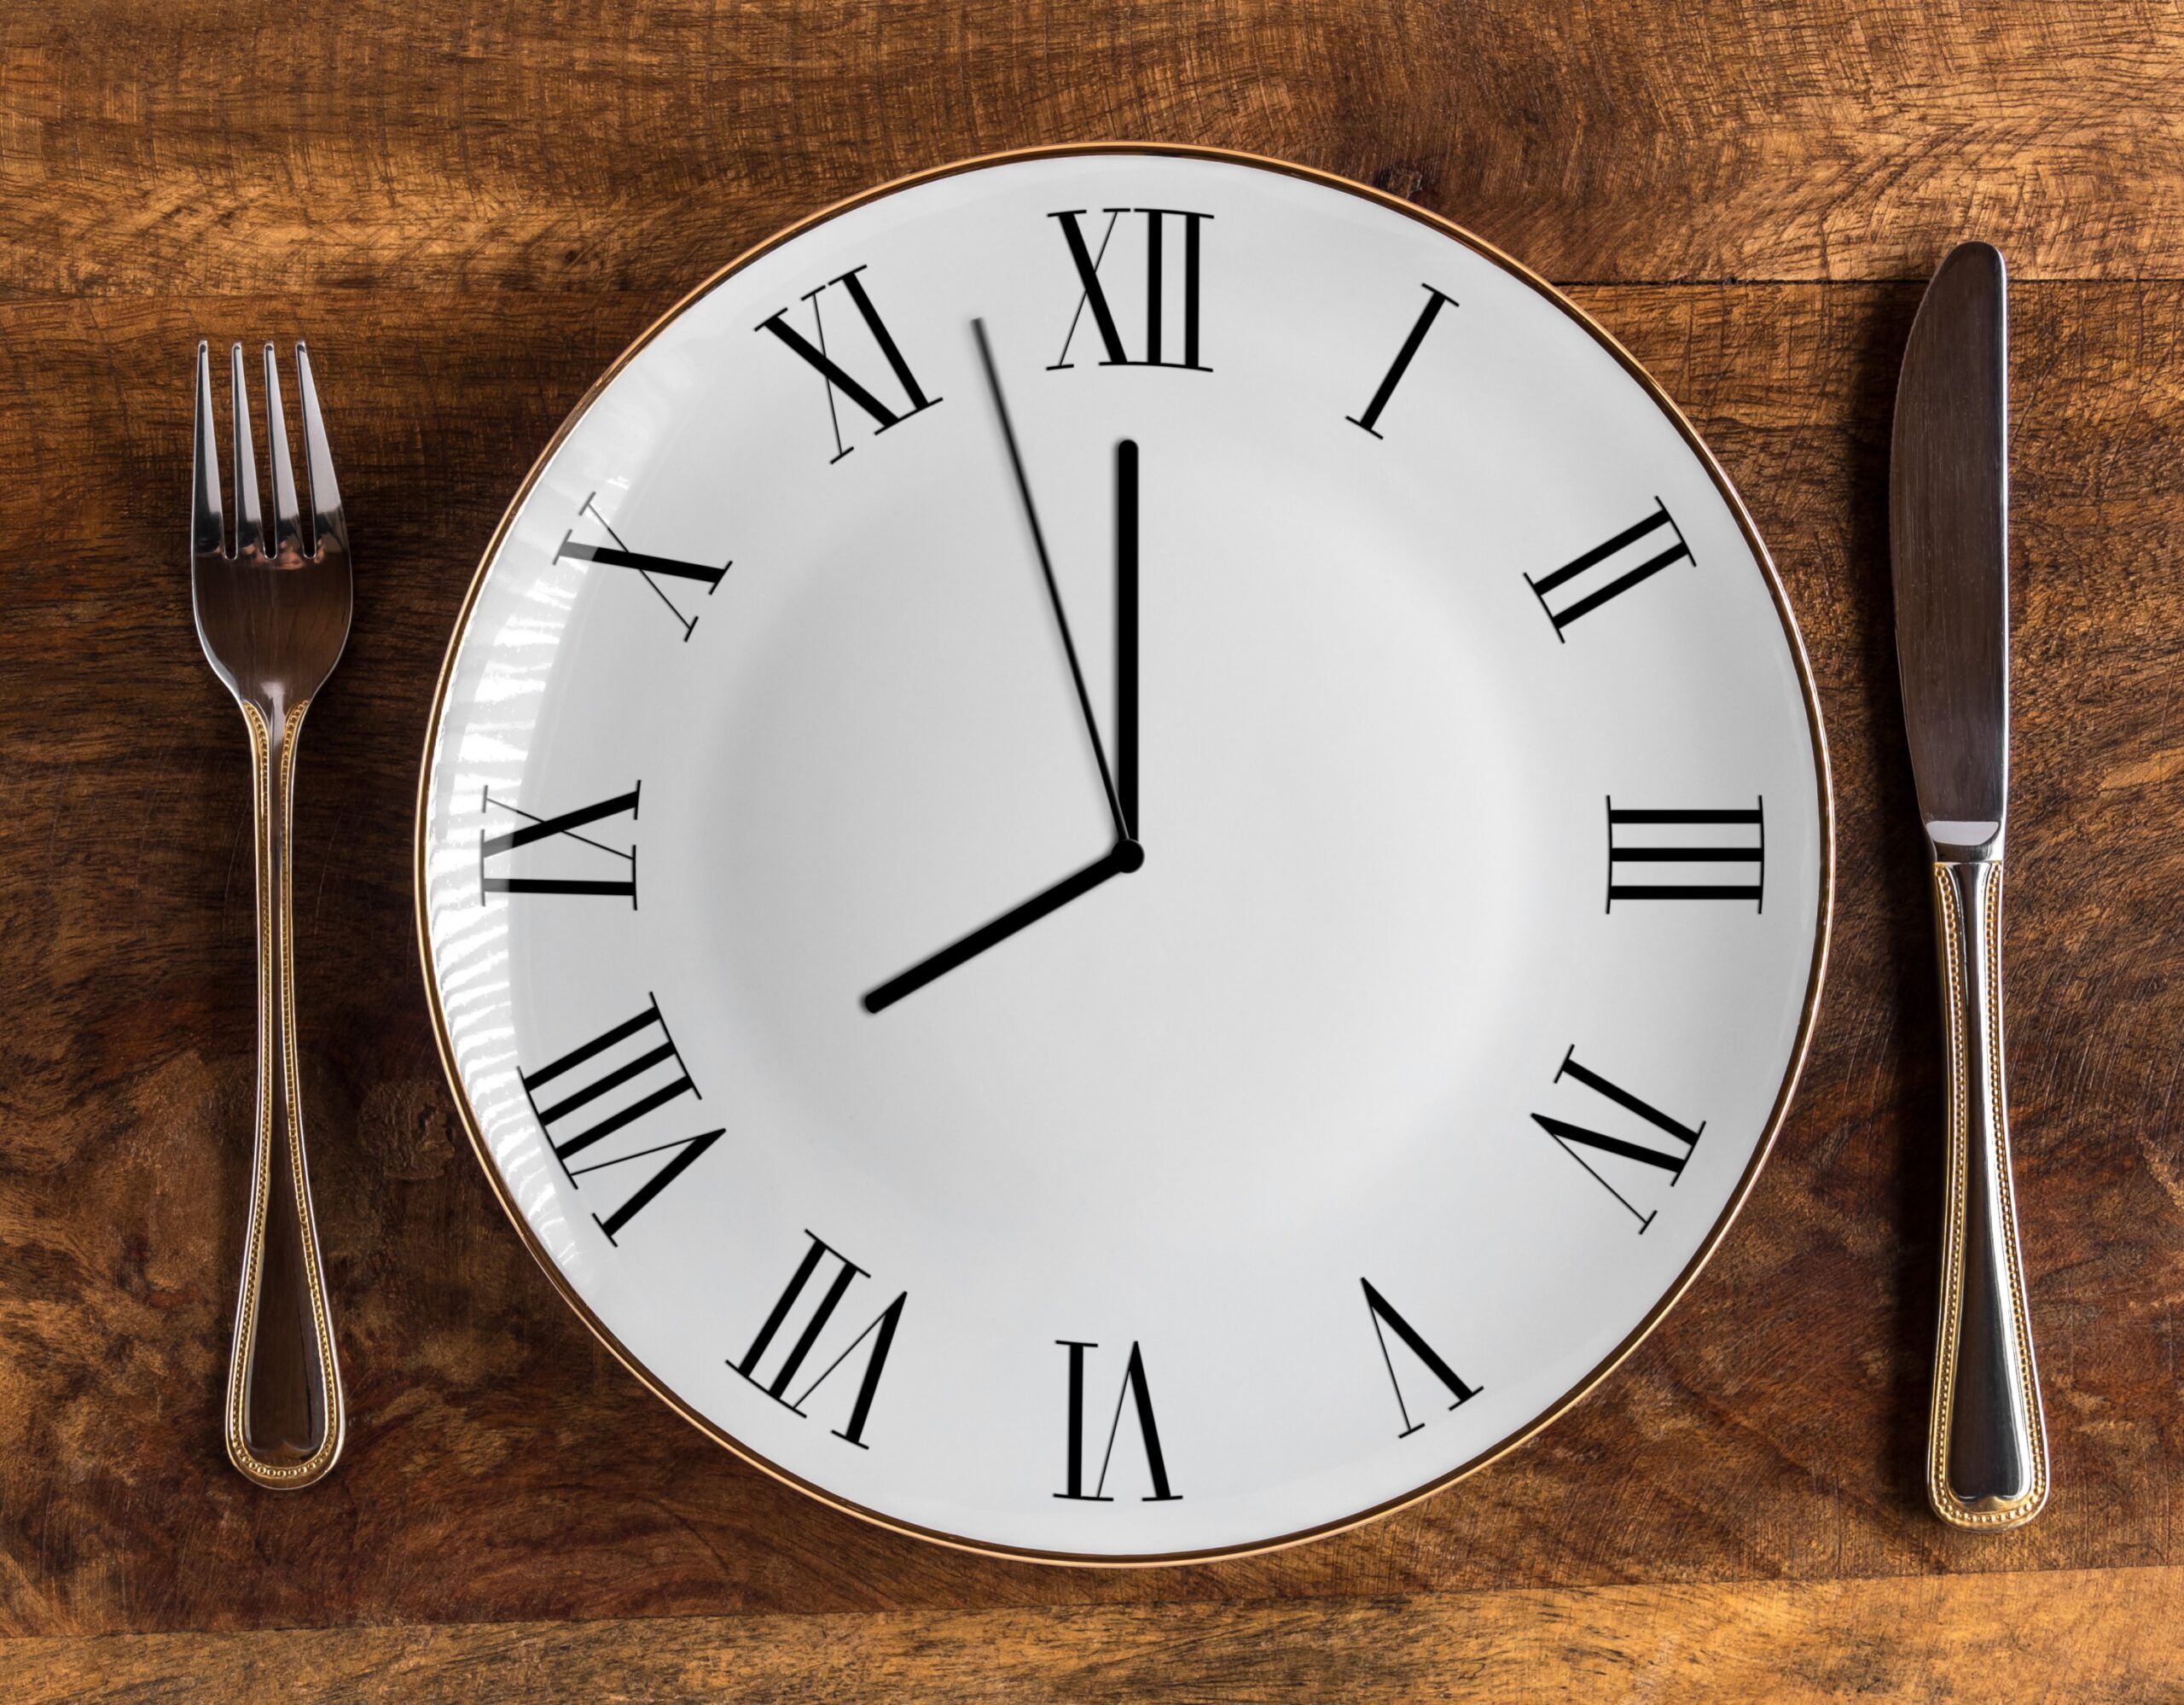 Intermittent Fasting May Be Healthier Than Thought